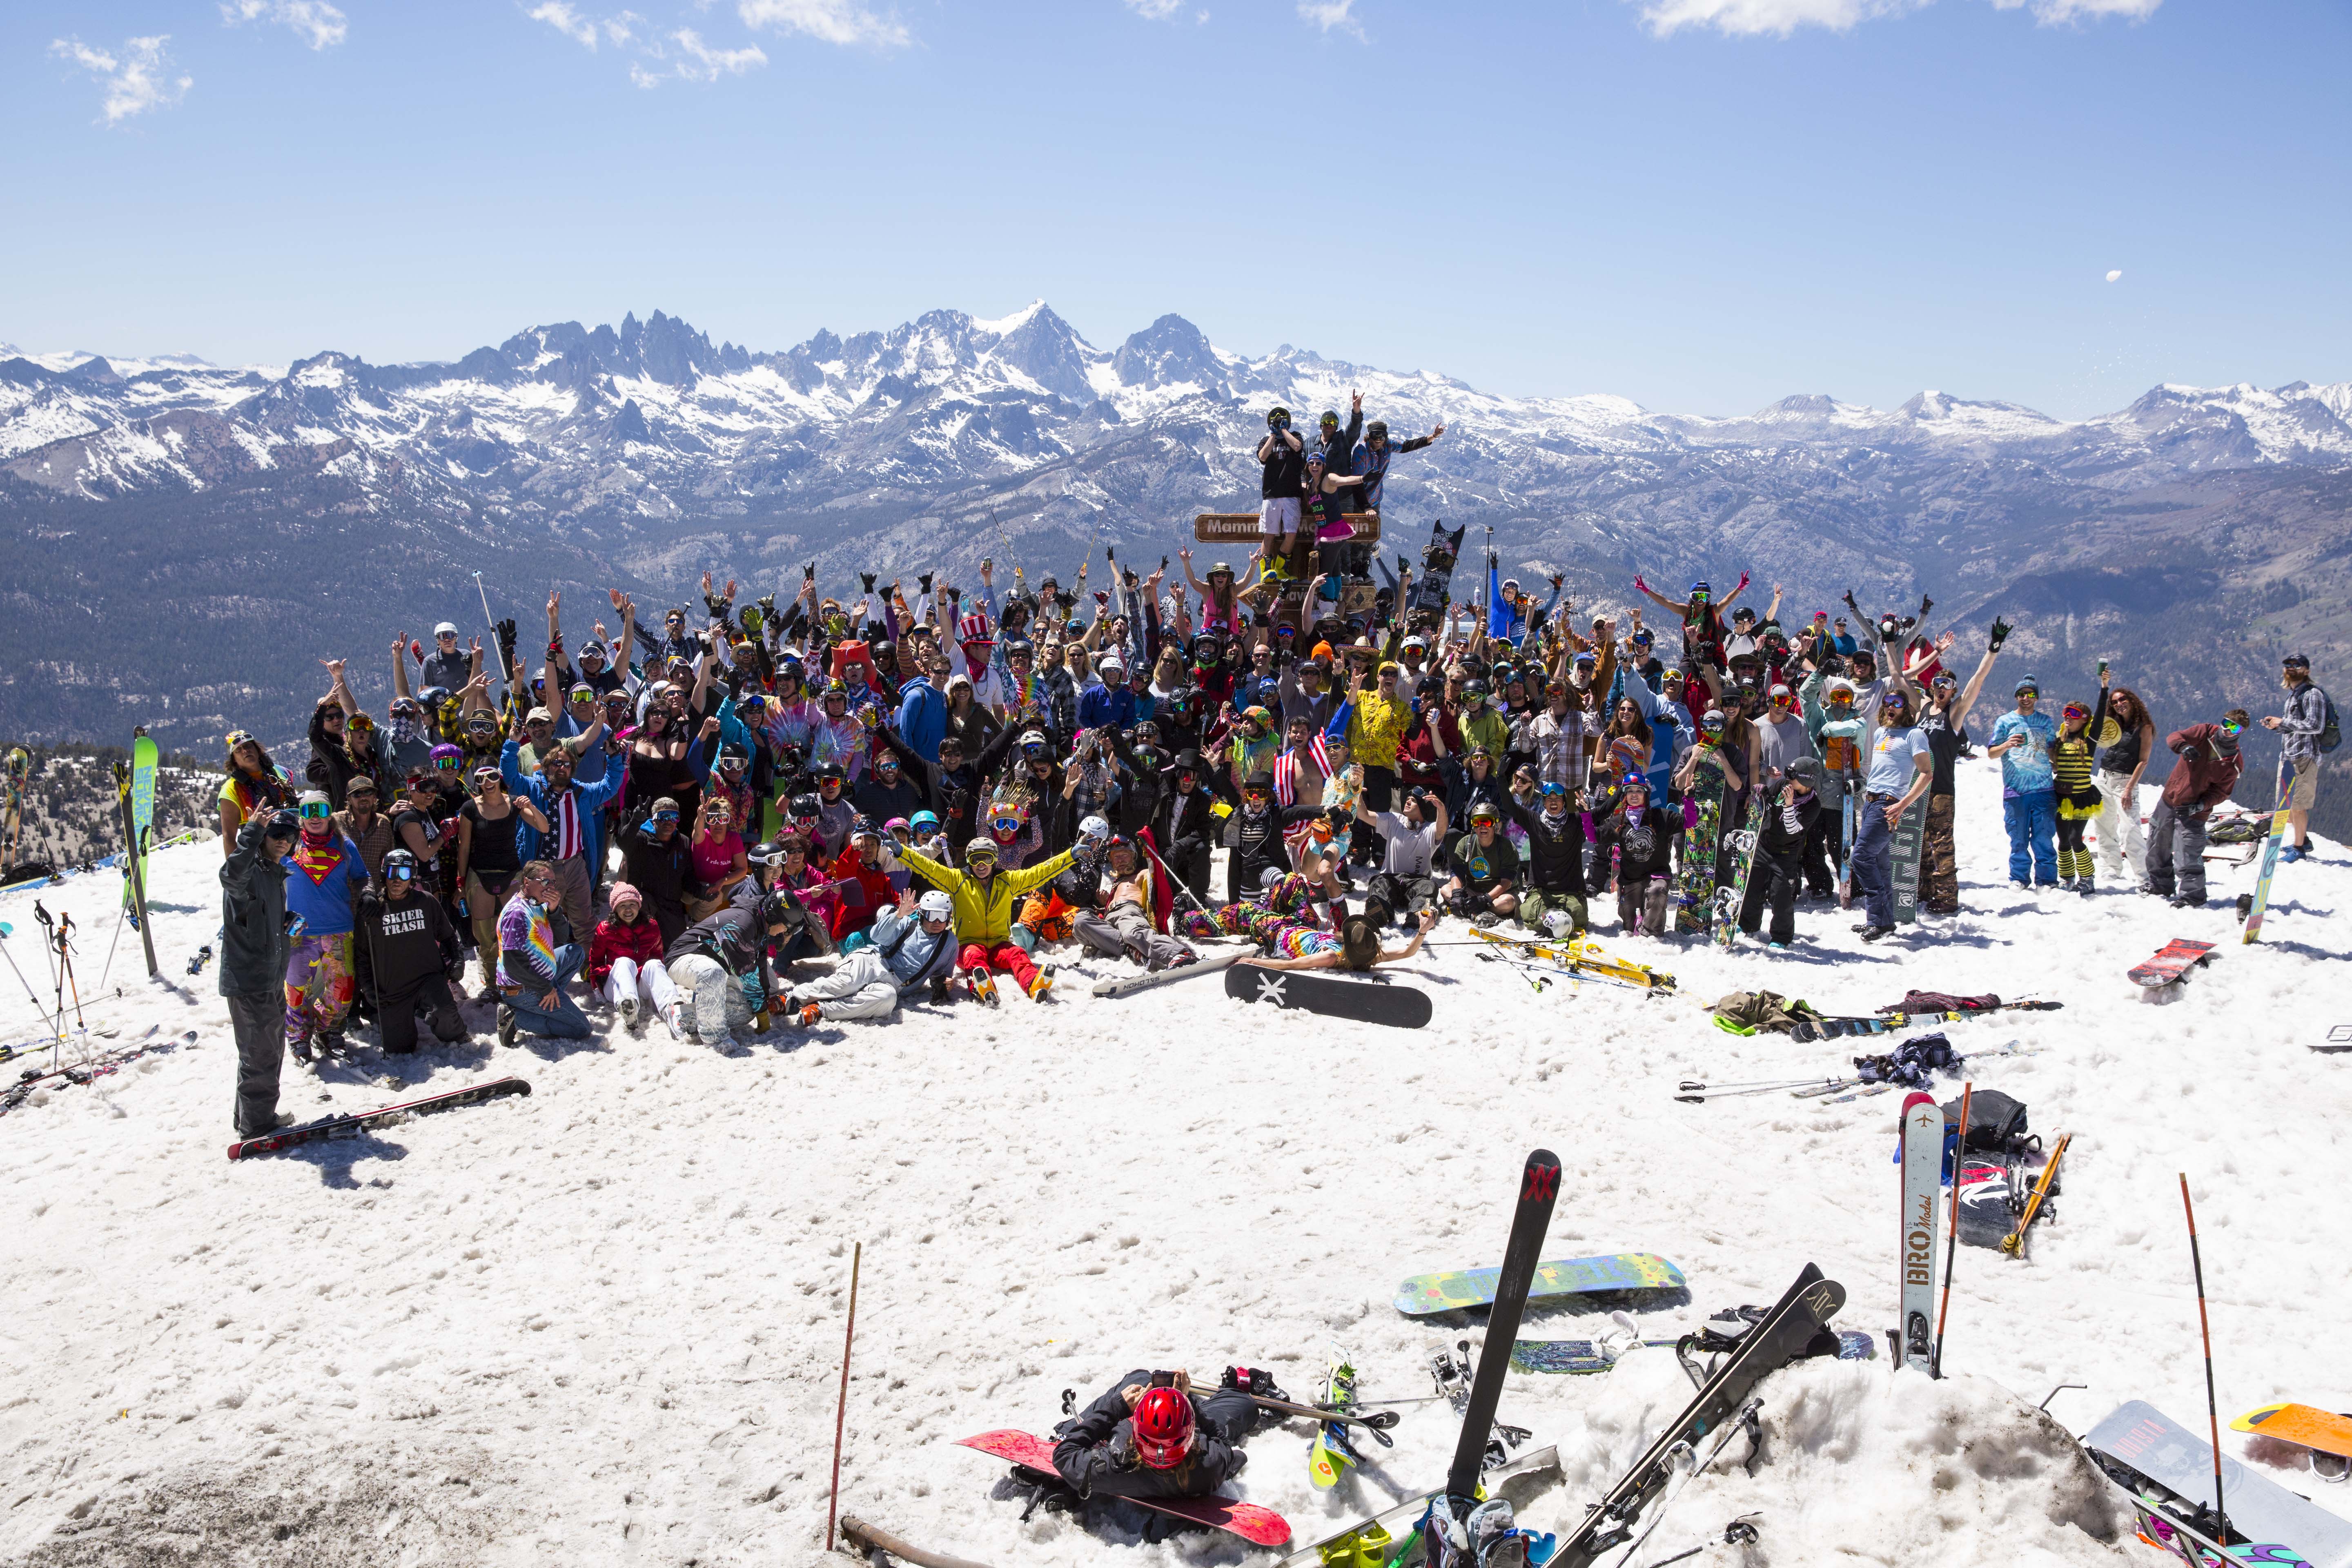 OK, everyone, say "cheese!" This was the scene at Mammoth Mountain on Memorial Day, the day of skiing and snowboarding this season at the resort. (Mammoth Mountain photo)